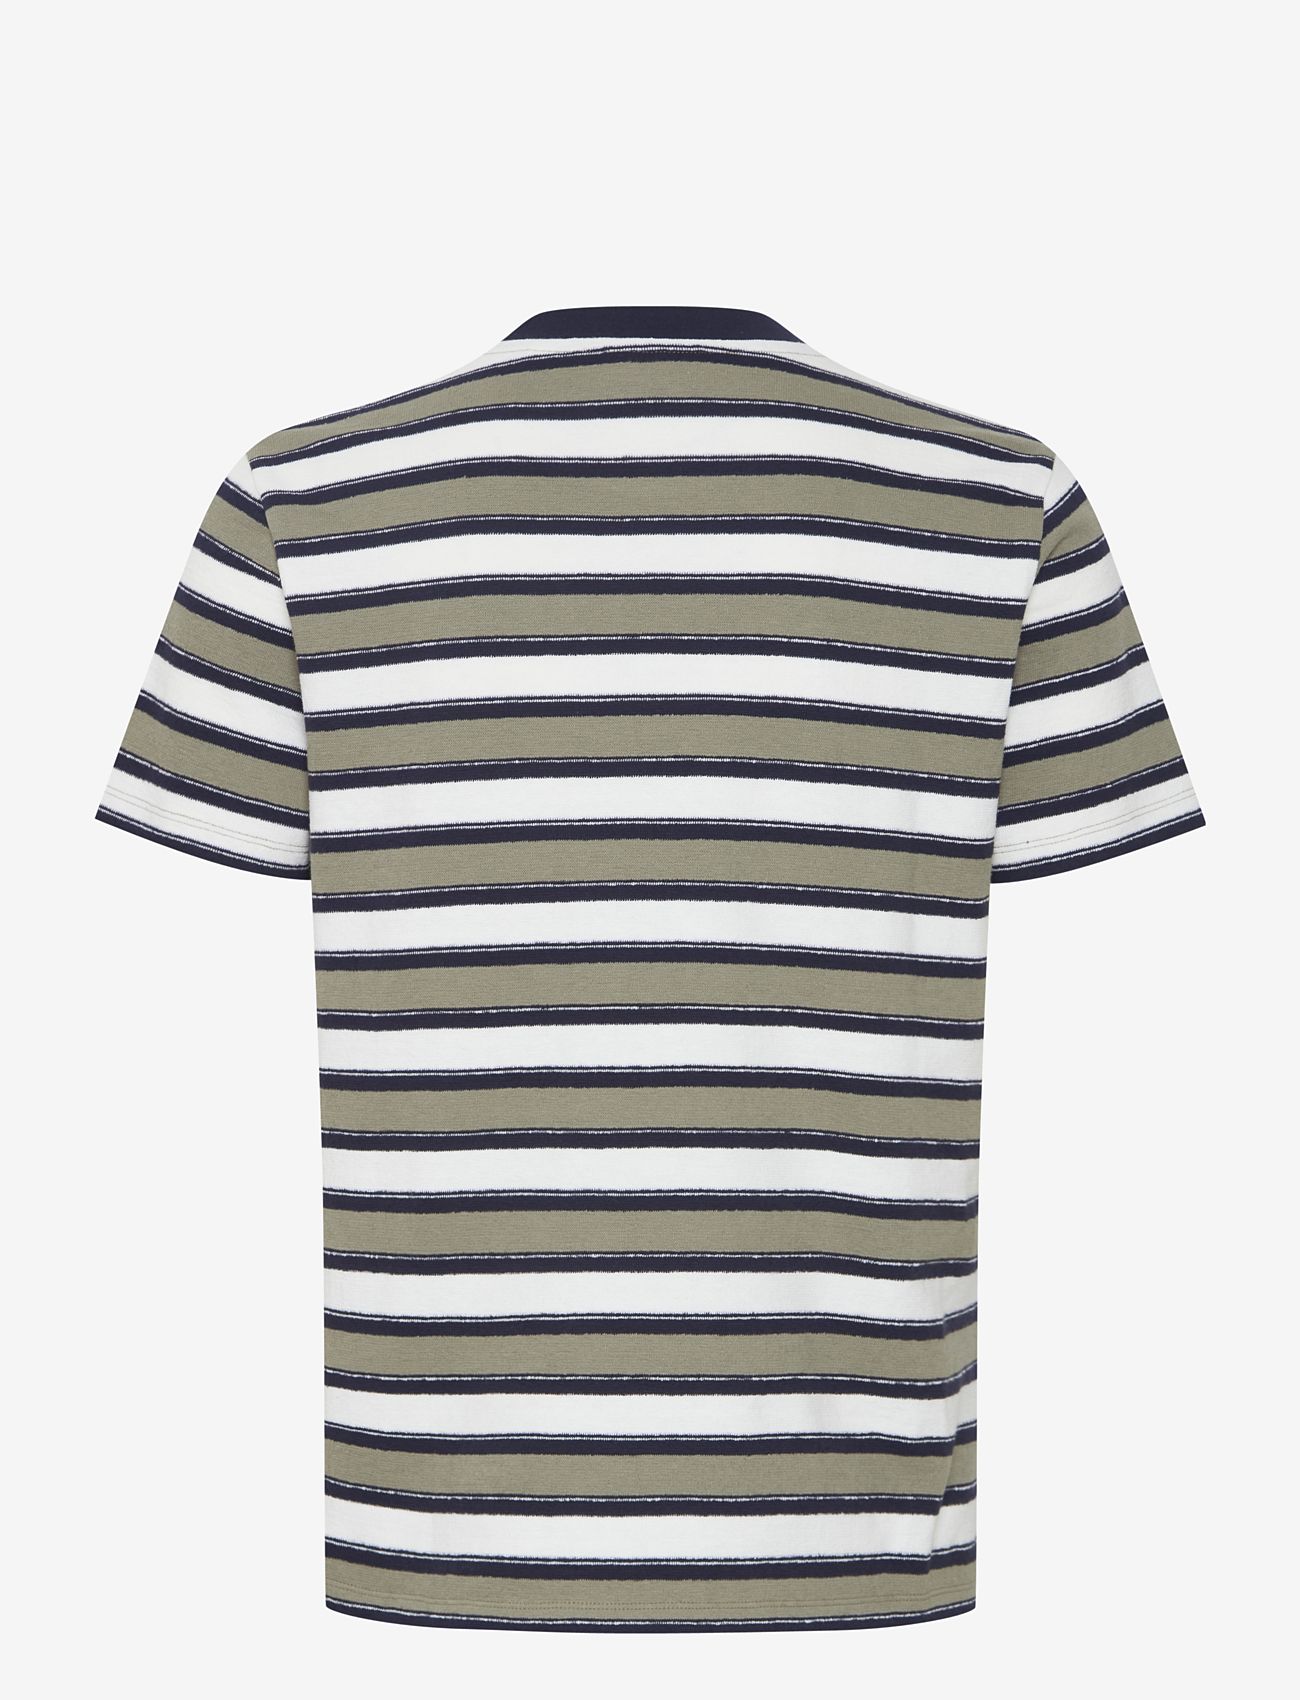 Casual Friday - CFThor terry striped tee - lowest prices - vetiver - 1